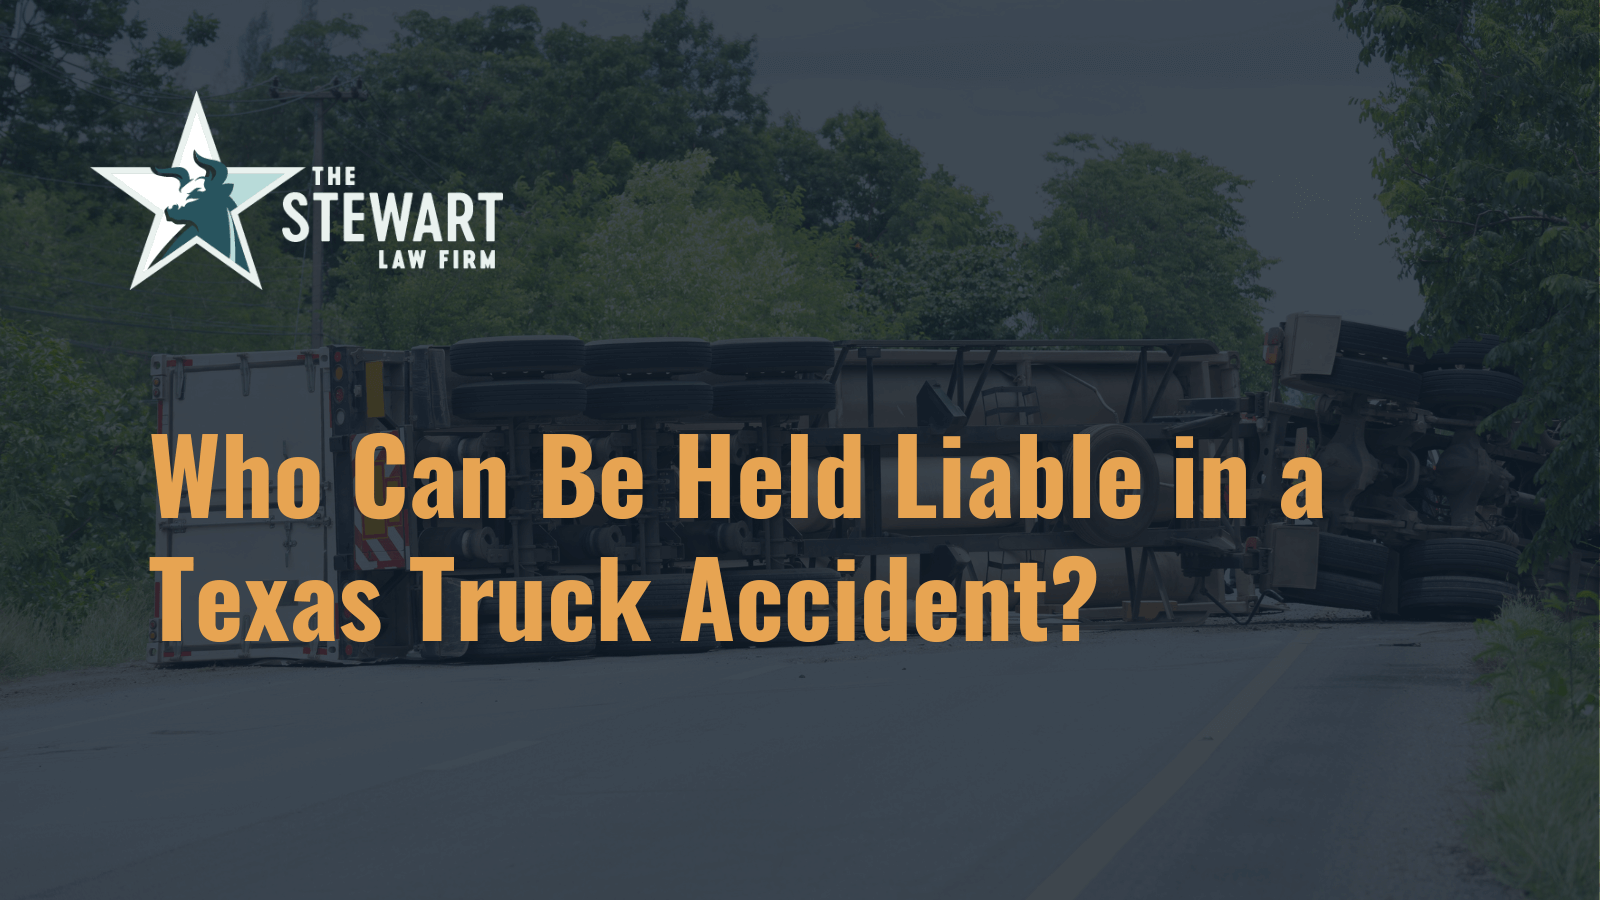 Who Can Be Held Liable in a Texas Truck Accident? - the stewart law firm - austin texas personal injury lawyer